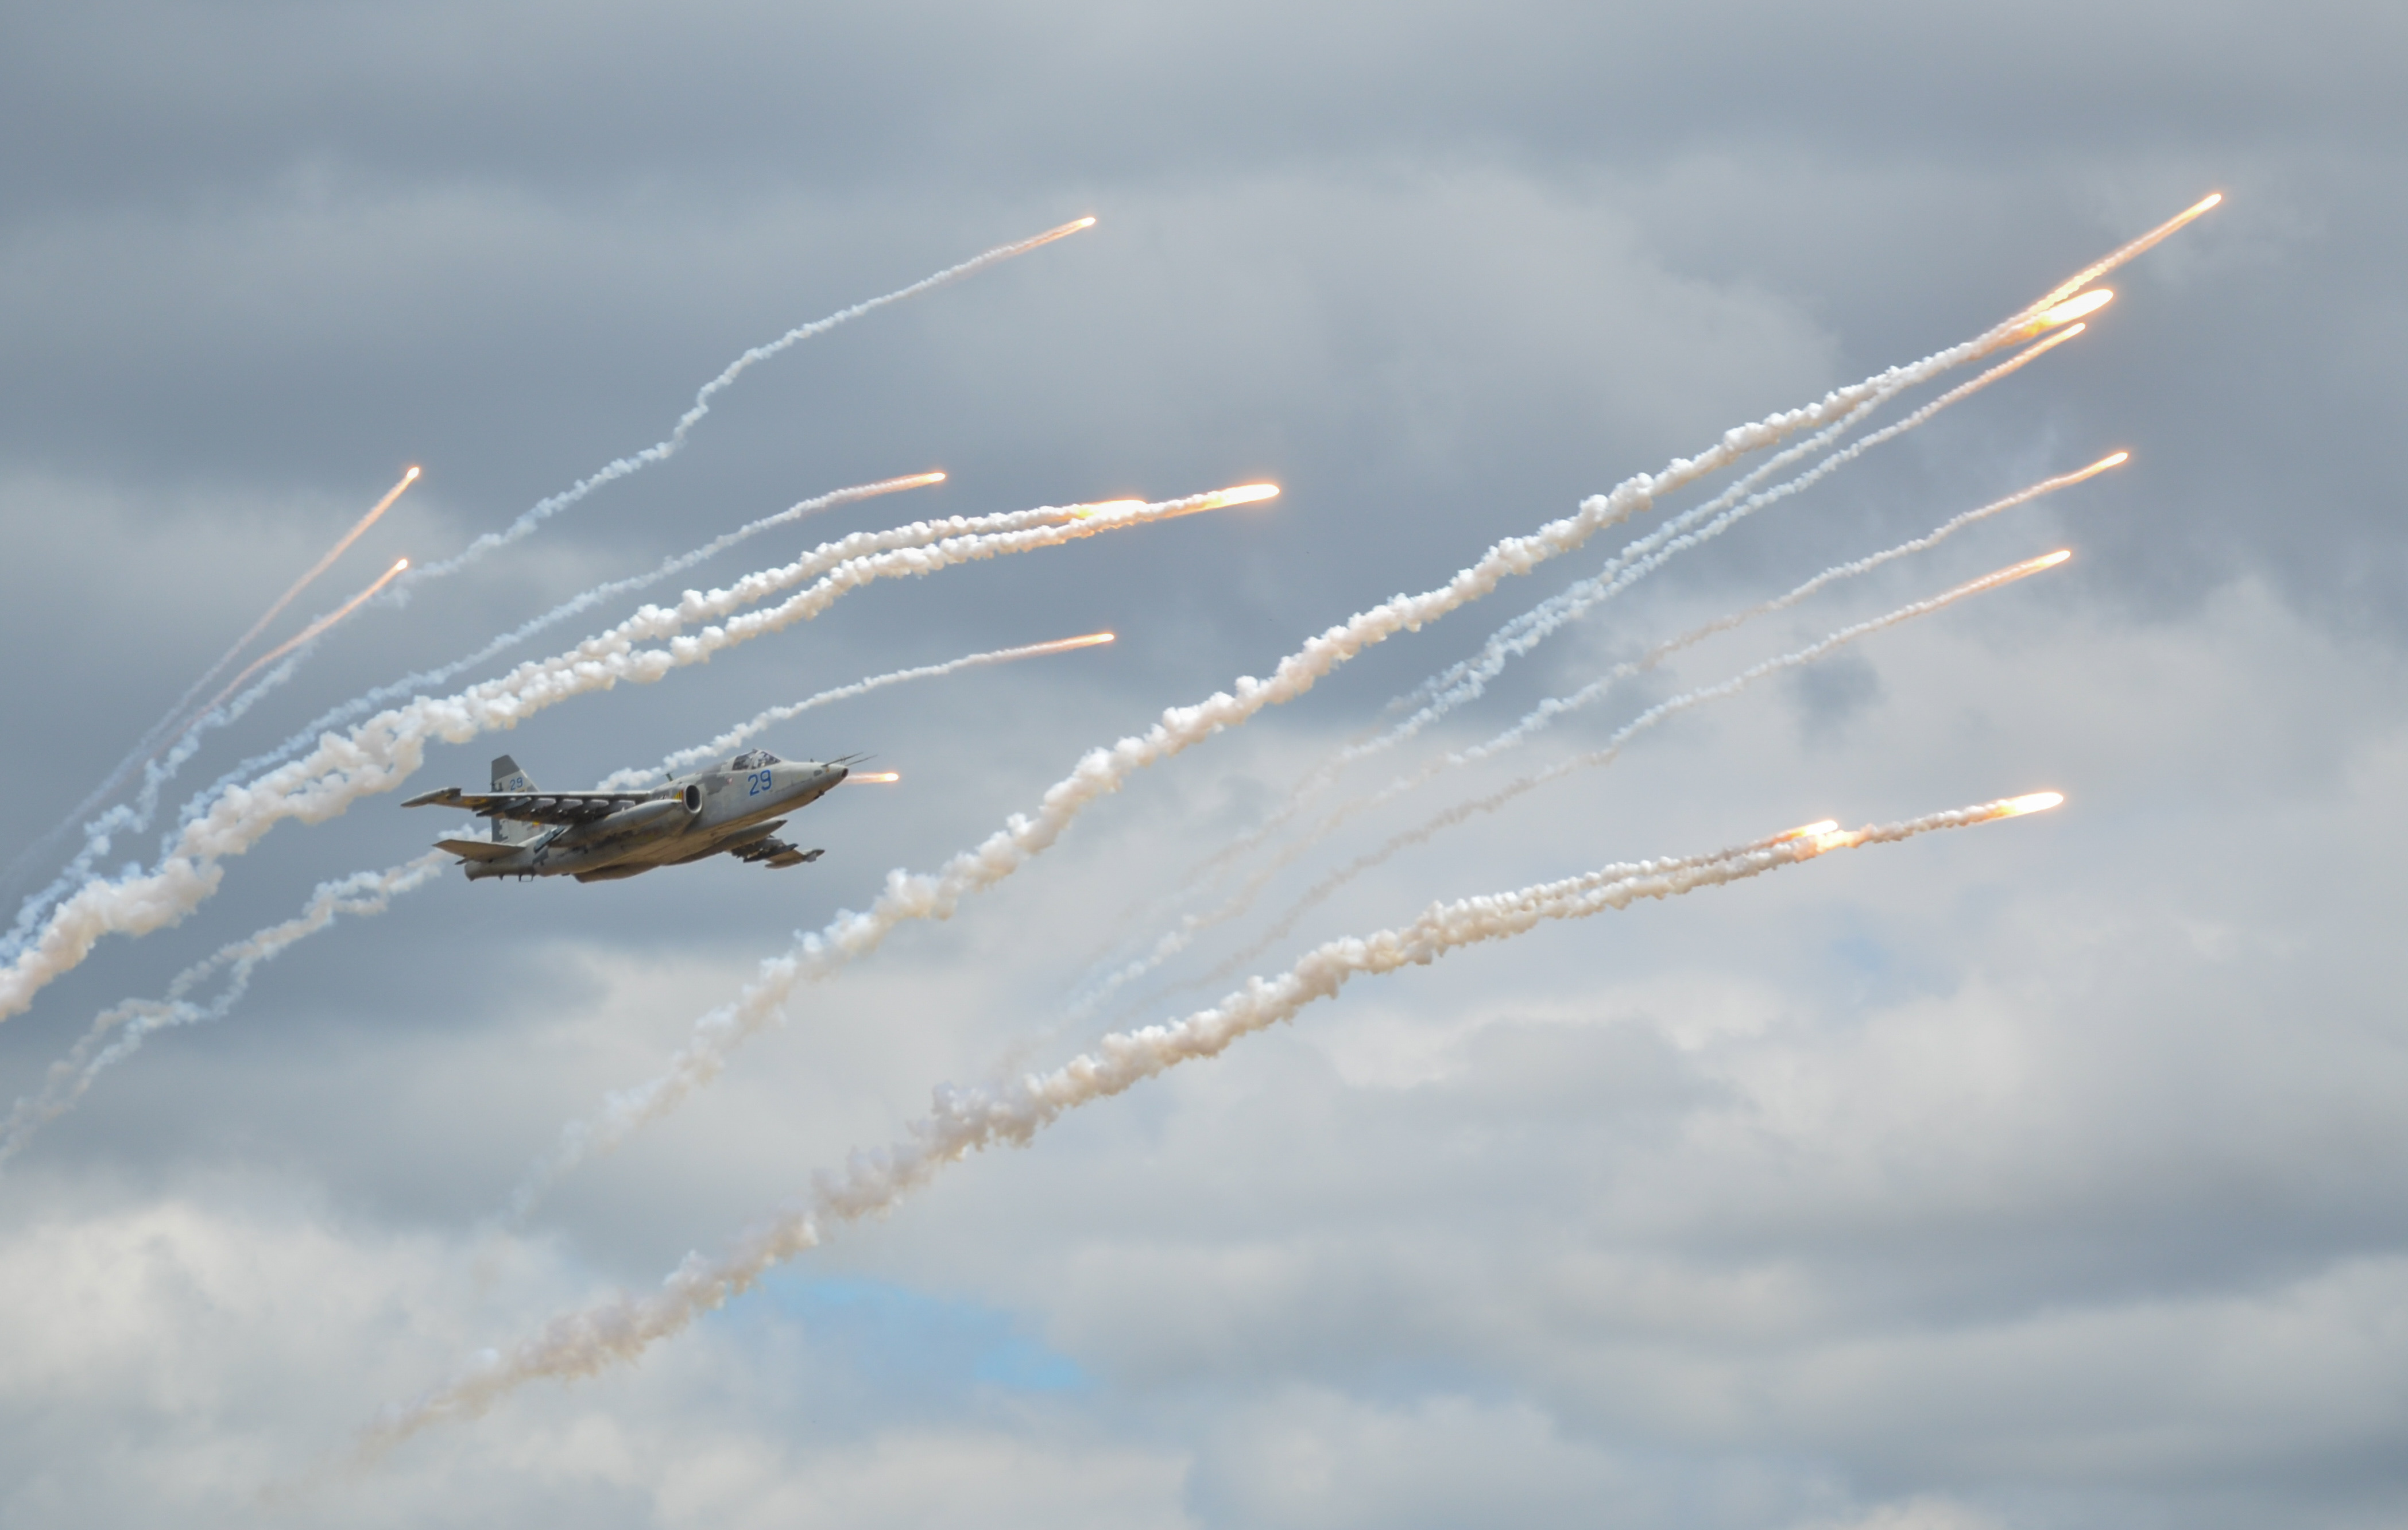 ukrainian air force, military, sukhoi su 25, jet fighter, jet fighters